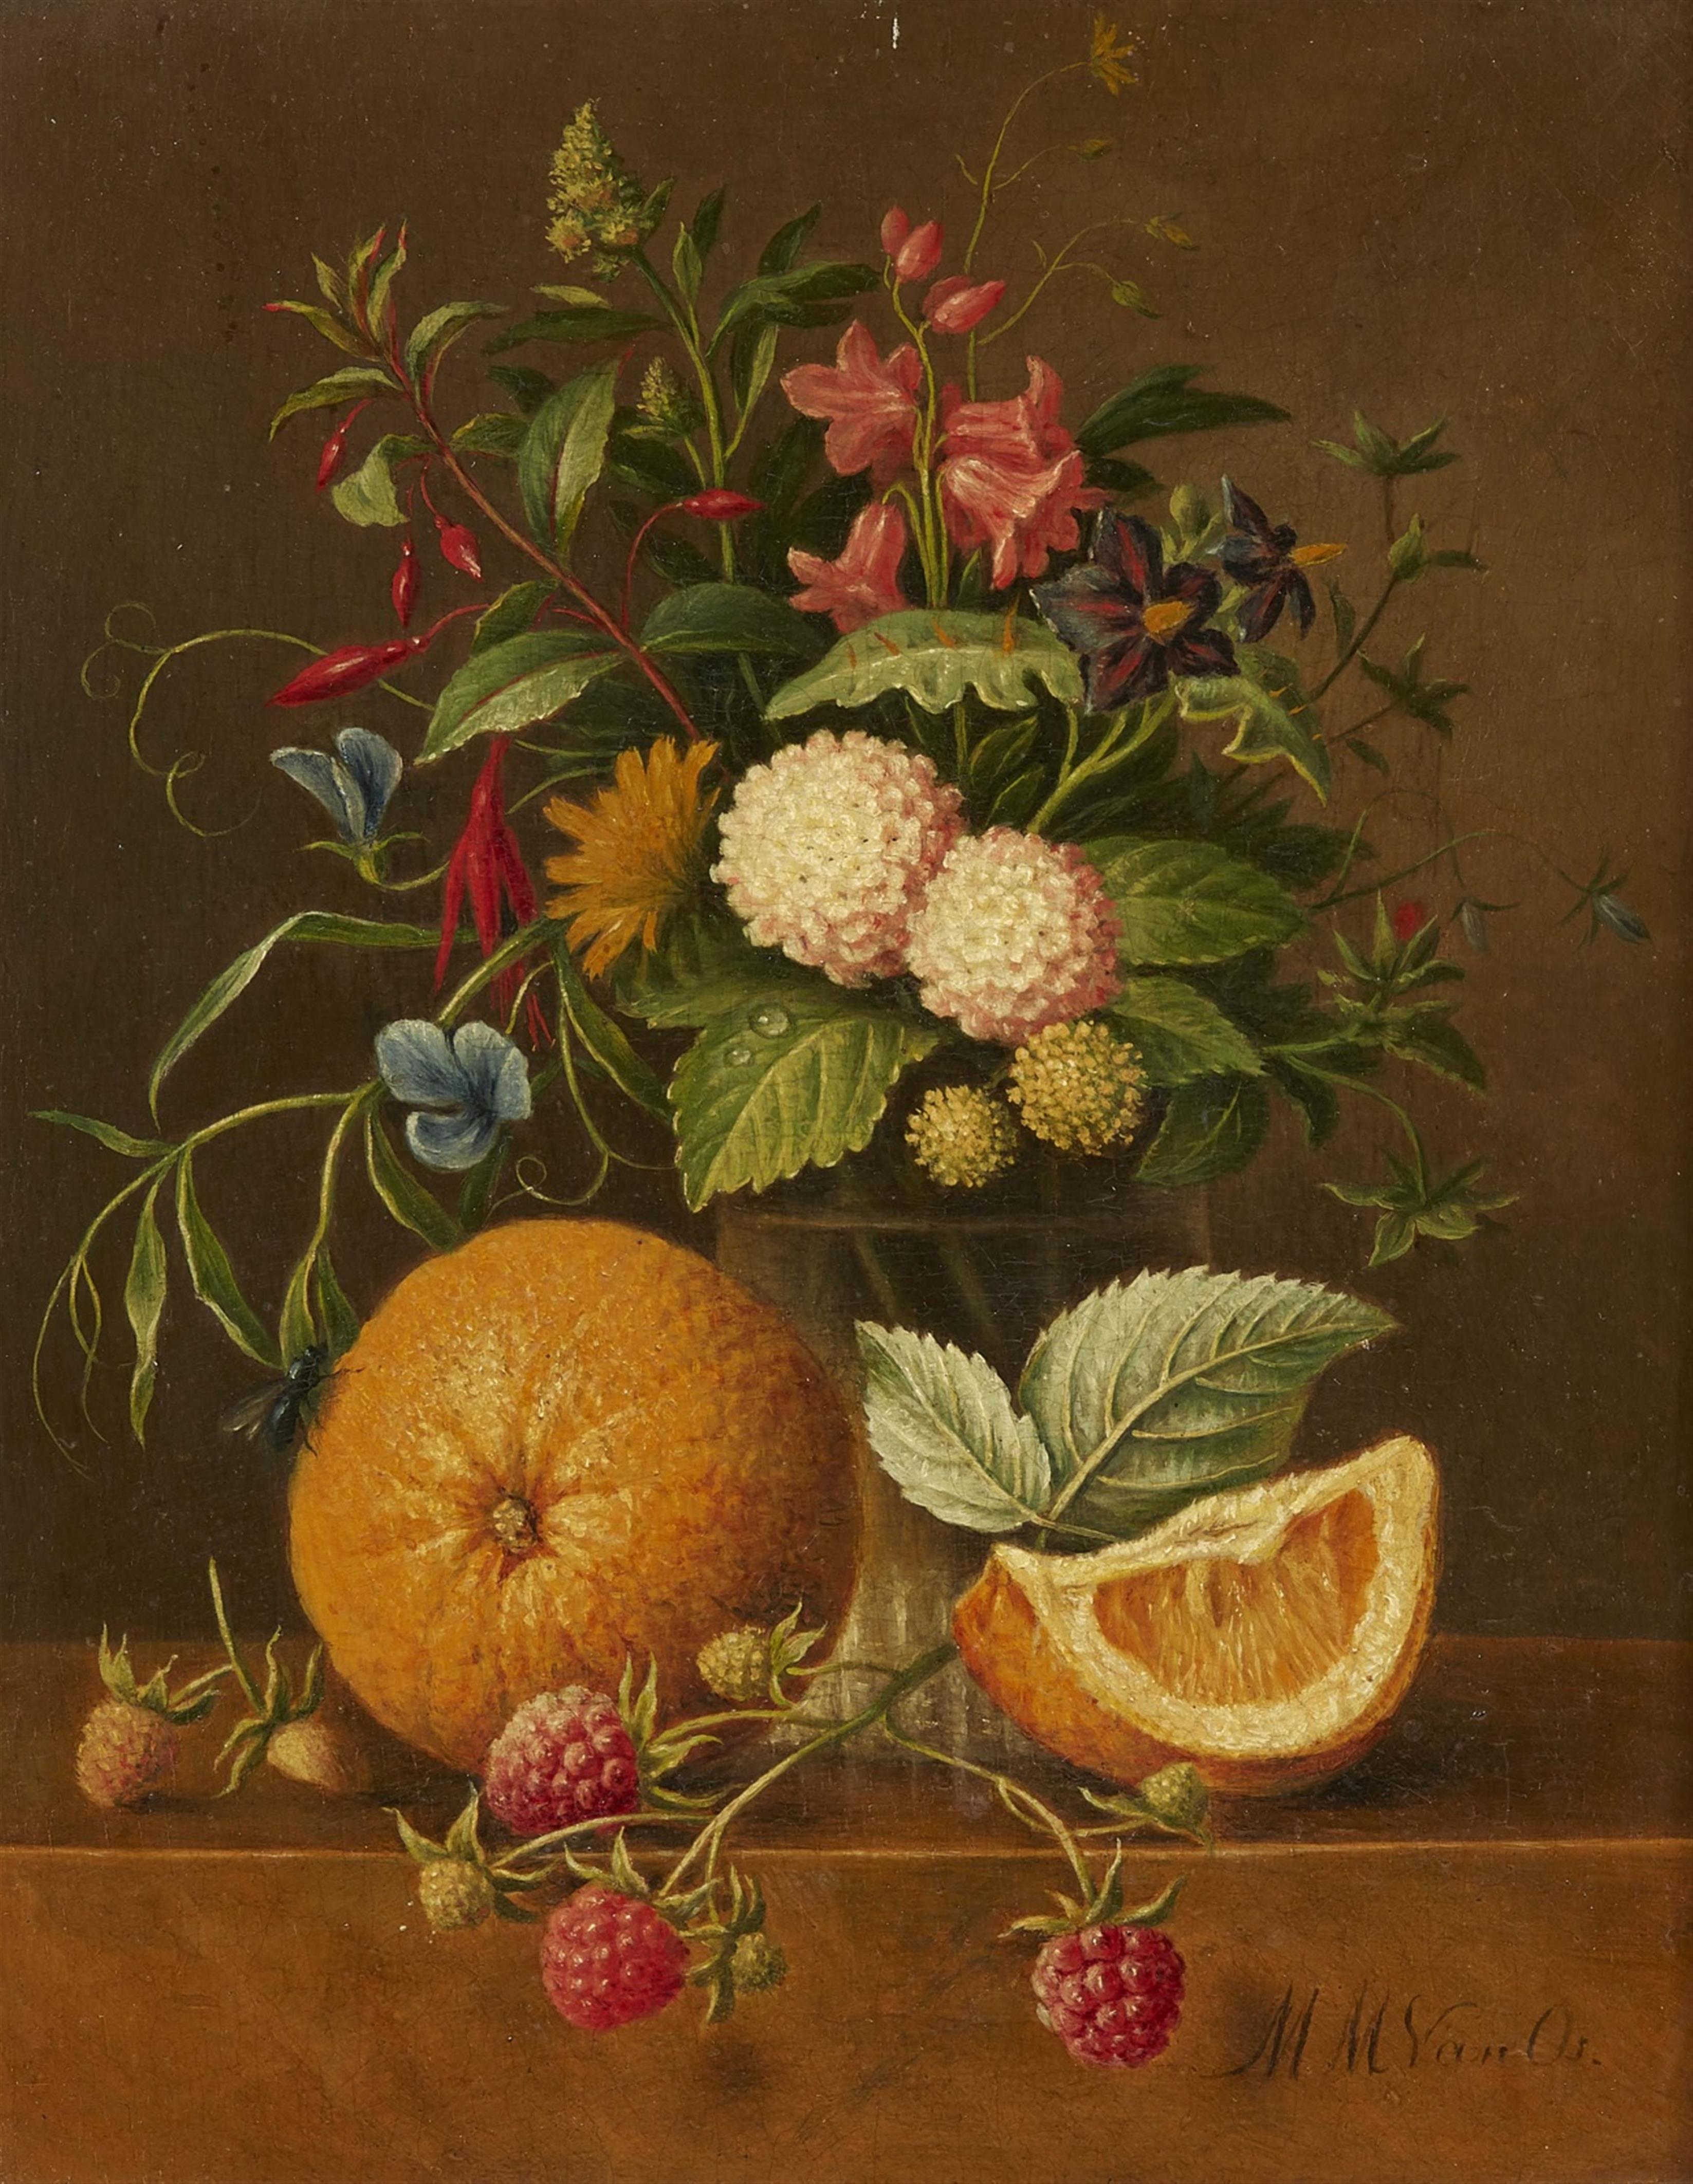 Maria Margaretha van Os - Still Life with a Vase of Flowers, Clementines, and Raspberries - image-1